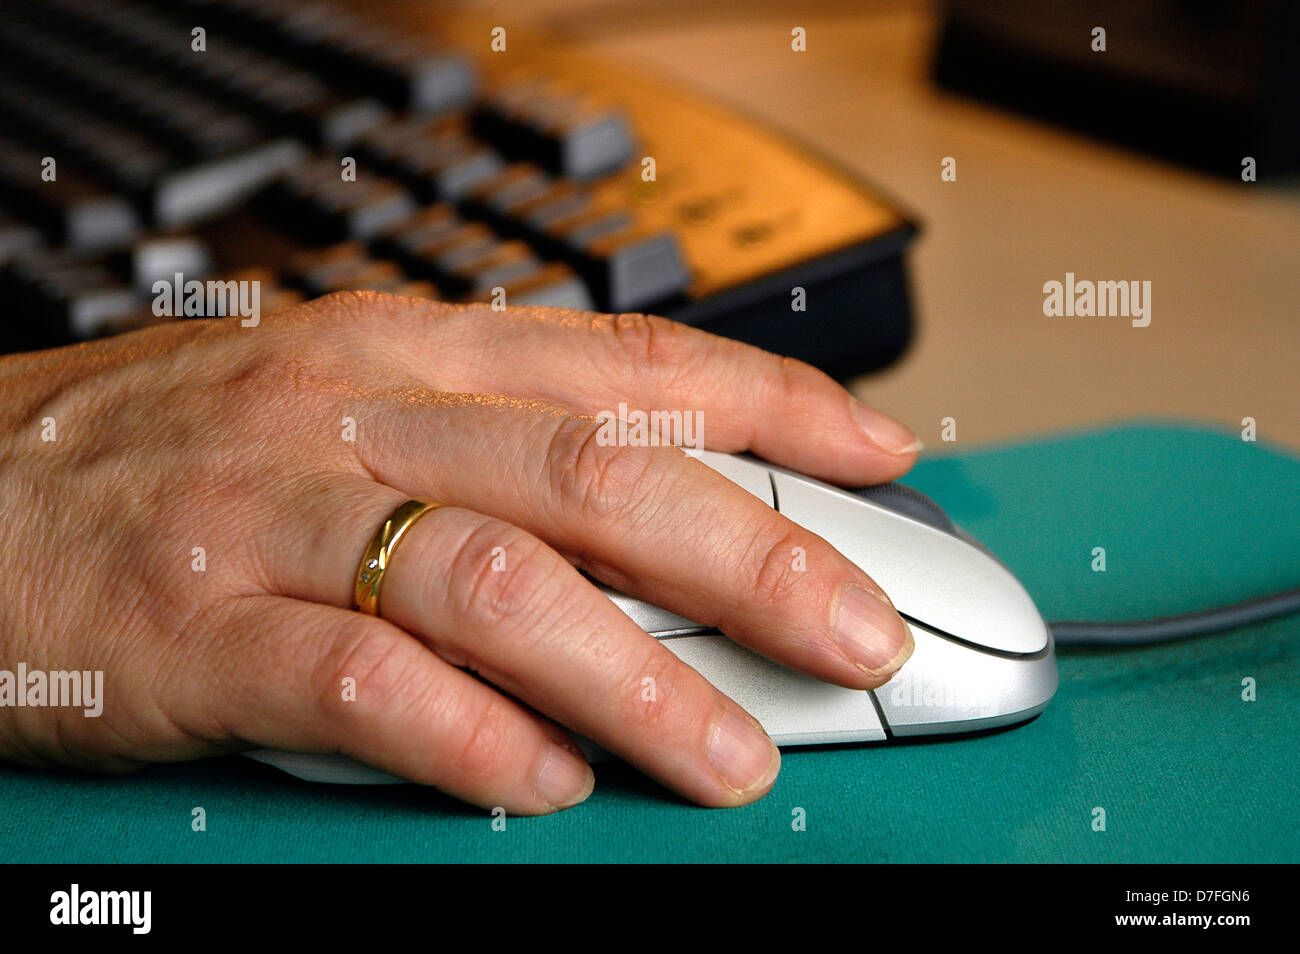 Computer, mouse, hand, keyboard, PC keyboard, hand on mouse Stock Photo